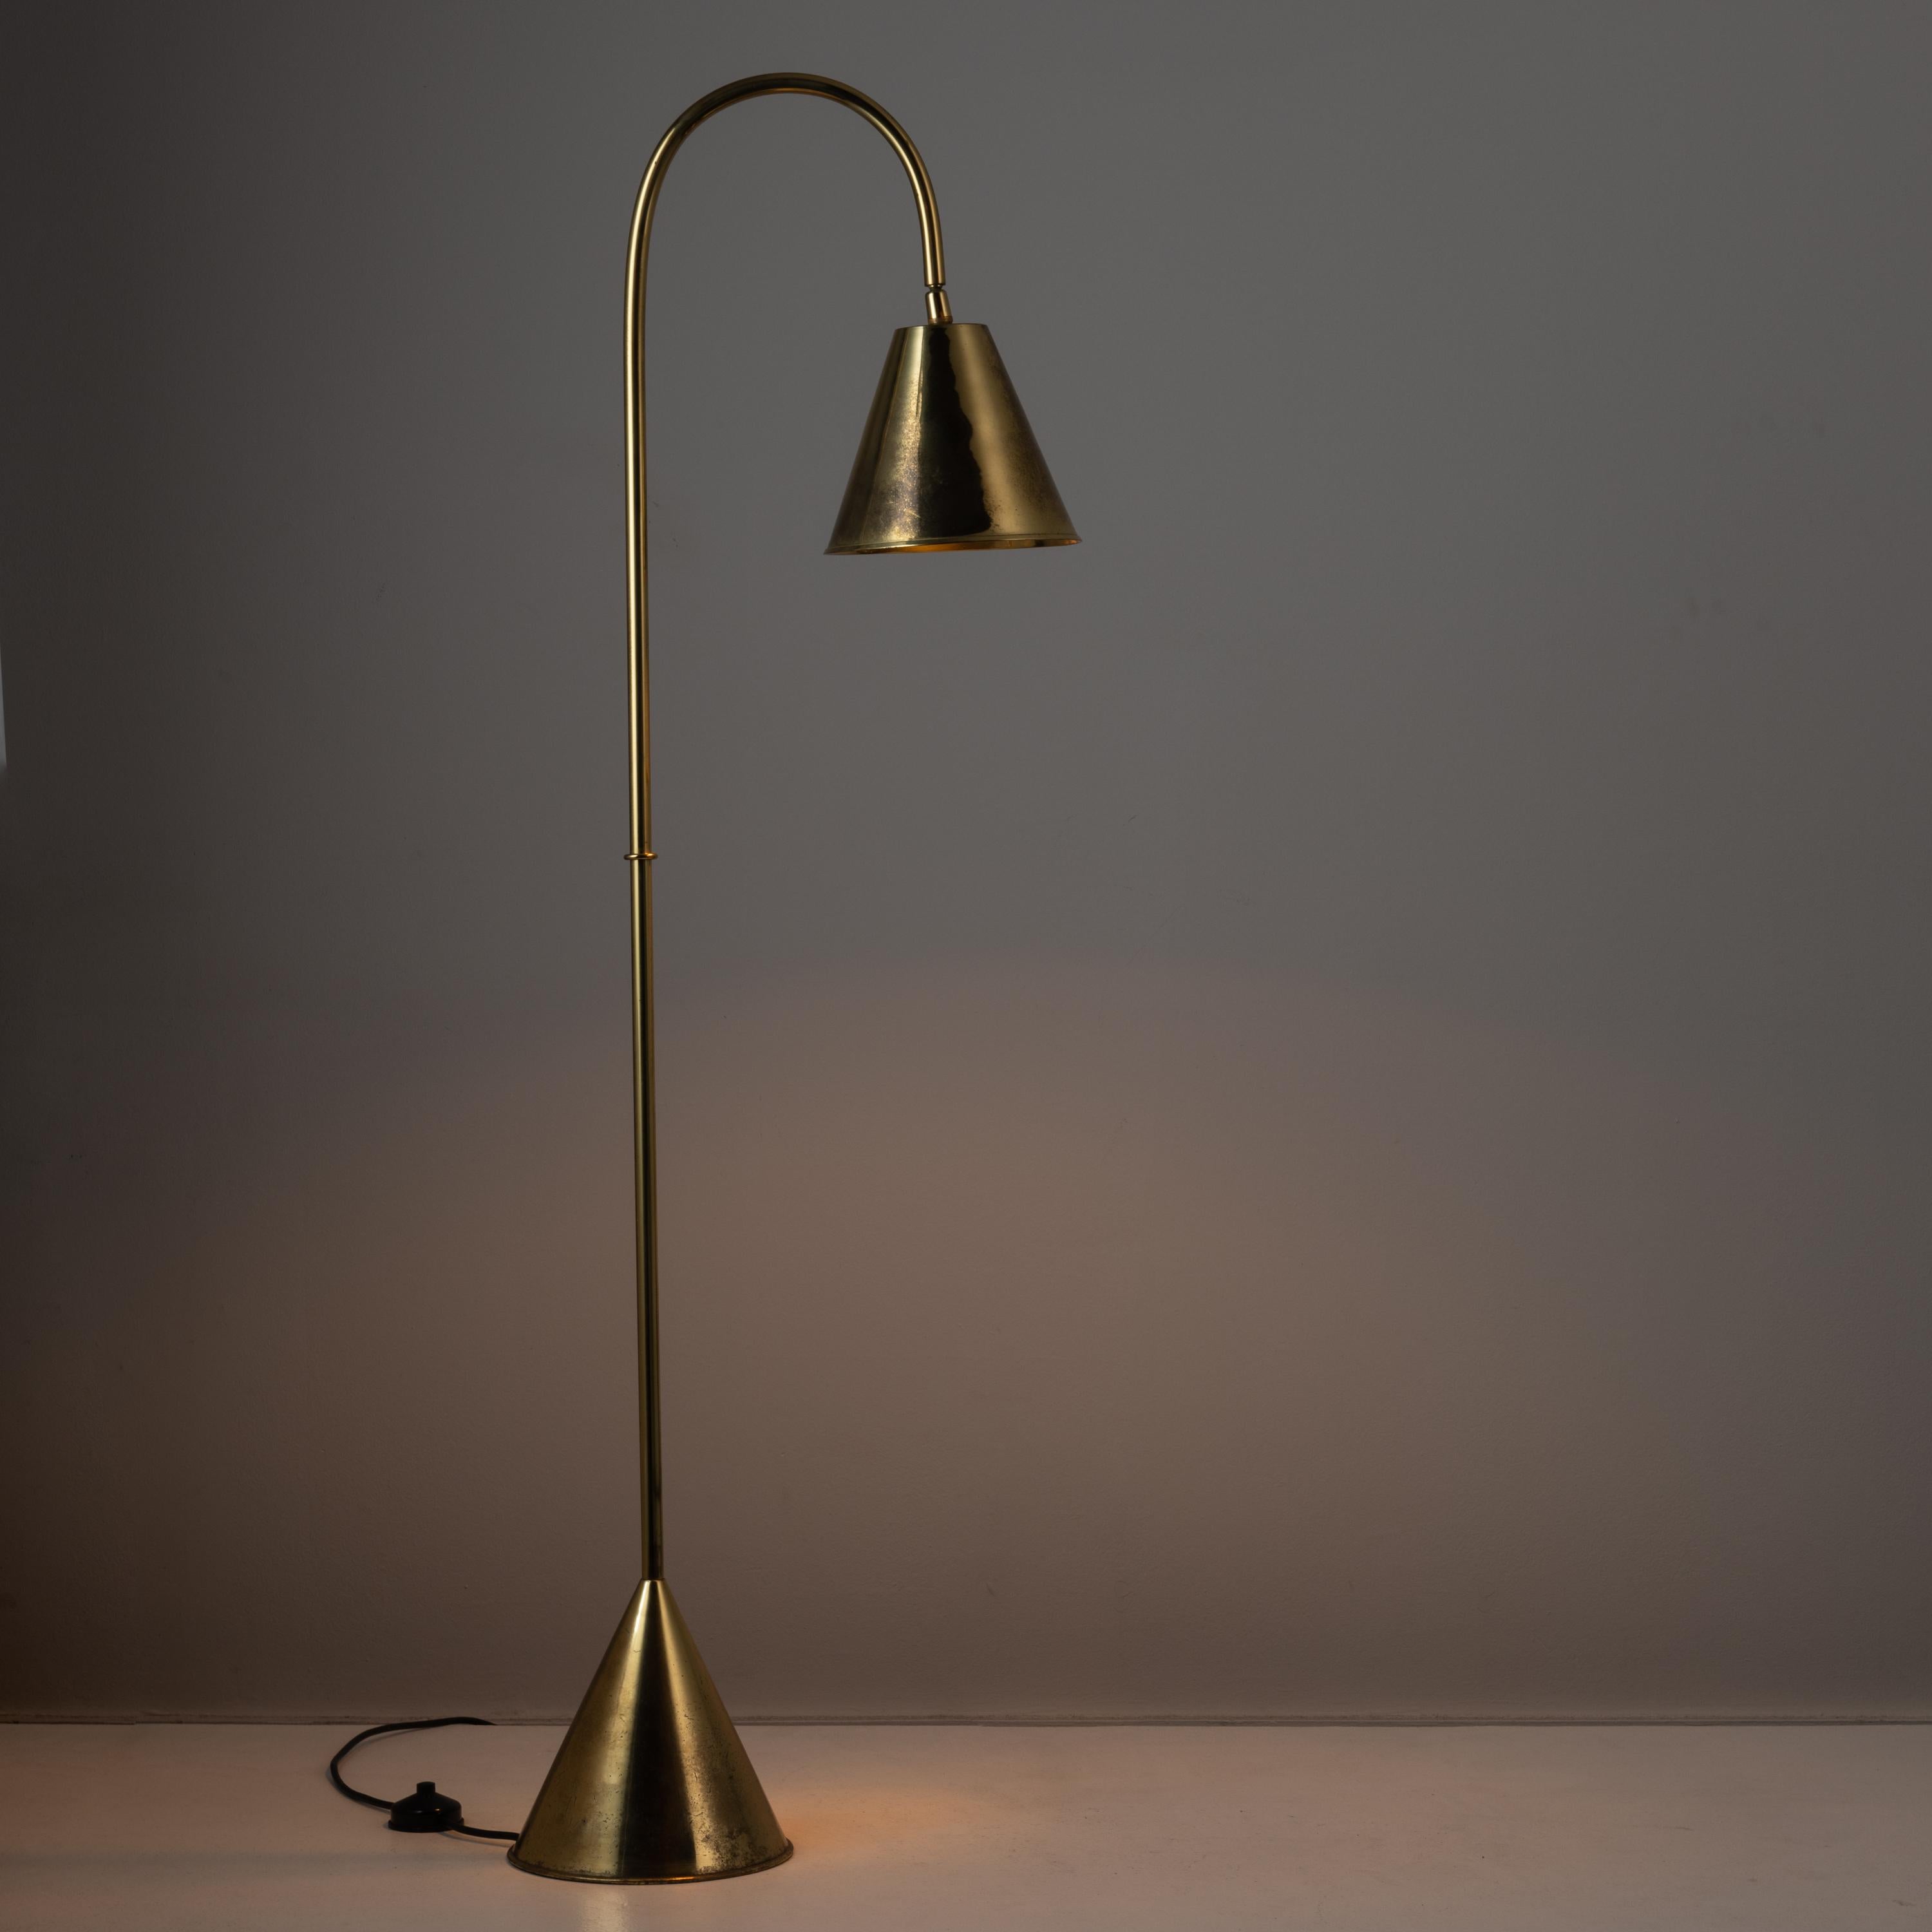 Rare brass floor lamp by Valenti. Designed and manufactured in Spain, circa the 1970s. Purchased as dead stock. Polished brass lamp body and adjustable shade. On and off foot switch attached to cord. Holds one E27 socket type, adapted for the US. We